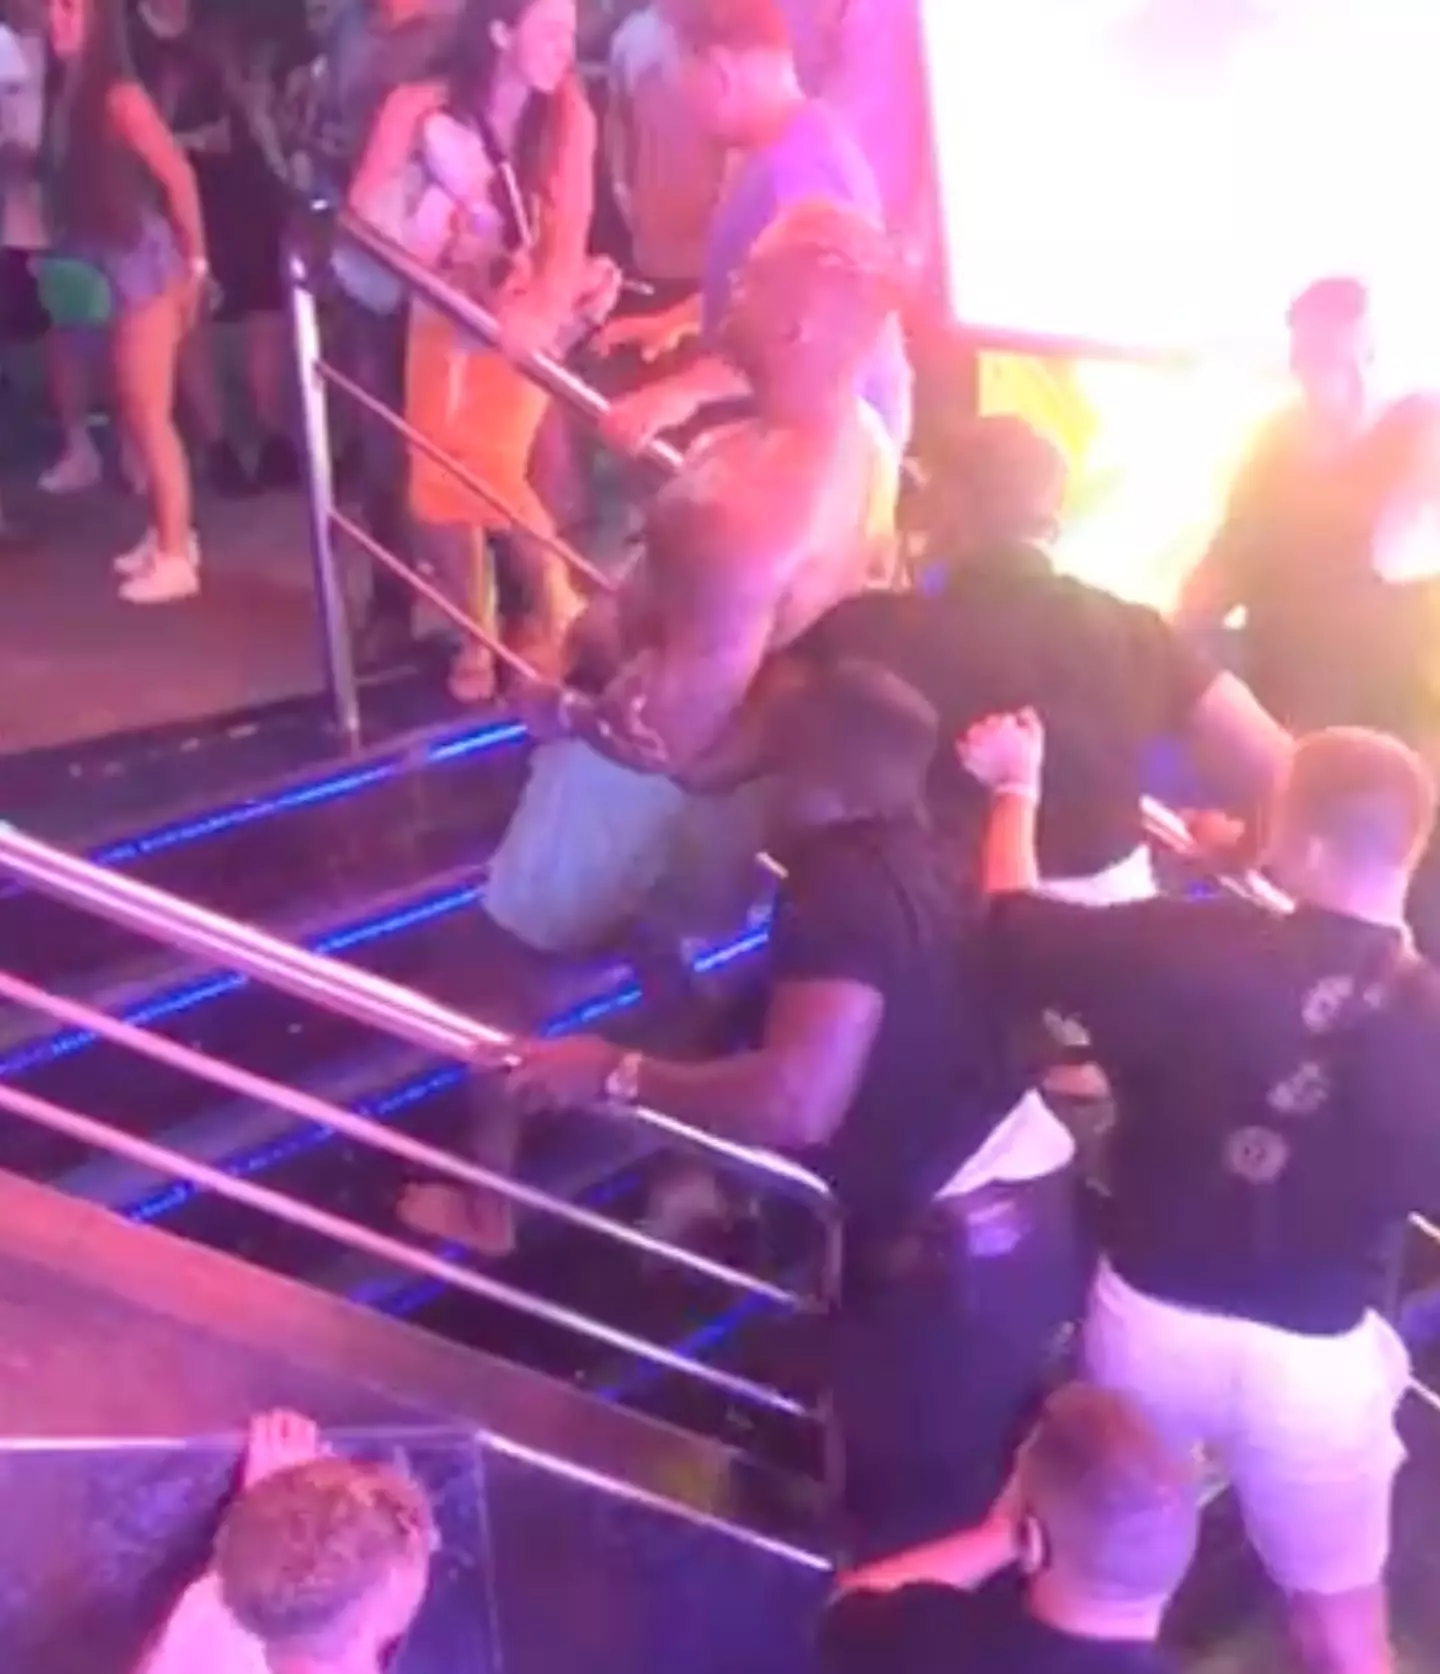 Footage captured witnesses shows Tobias White-Sansom being dragged out of Boomerang nightclub.